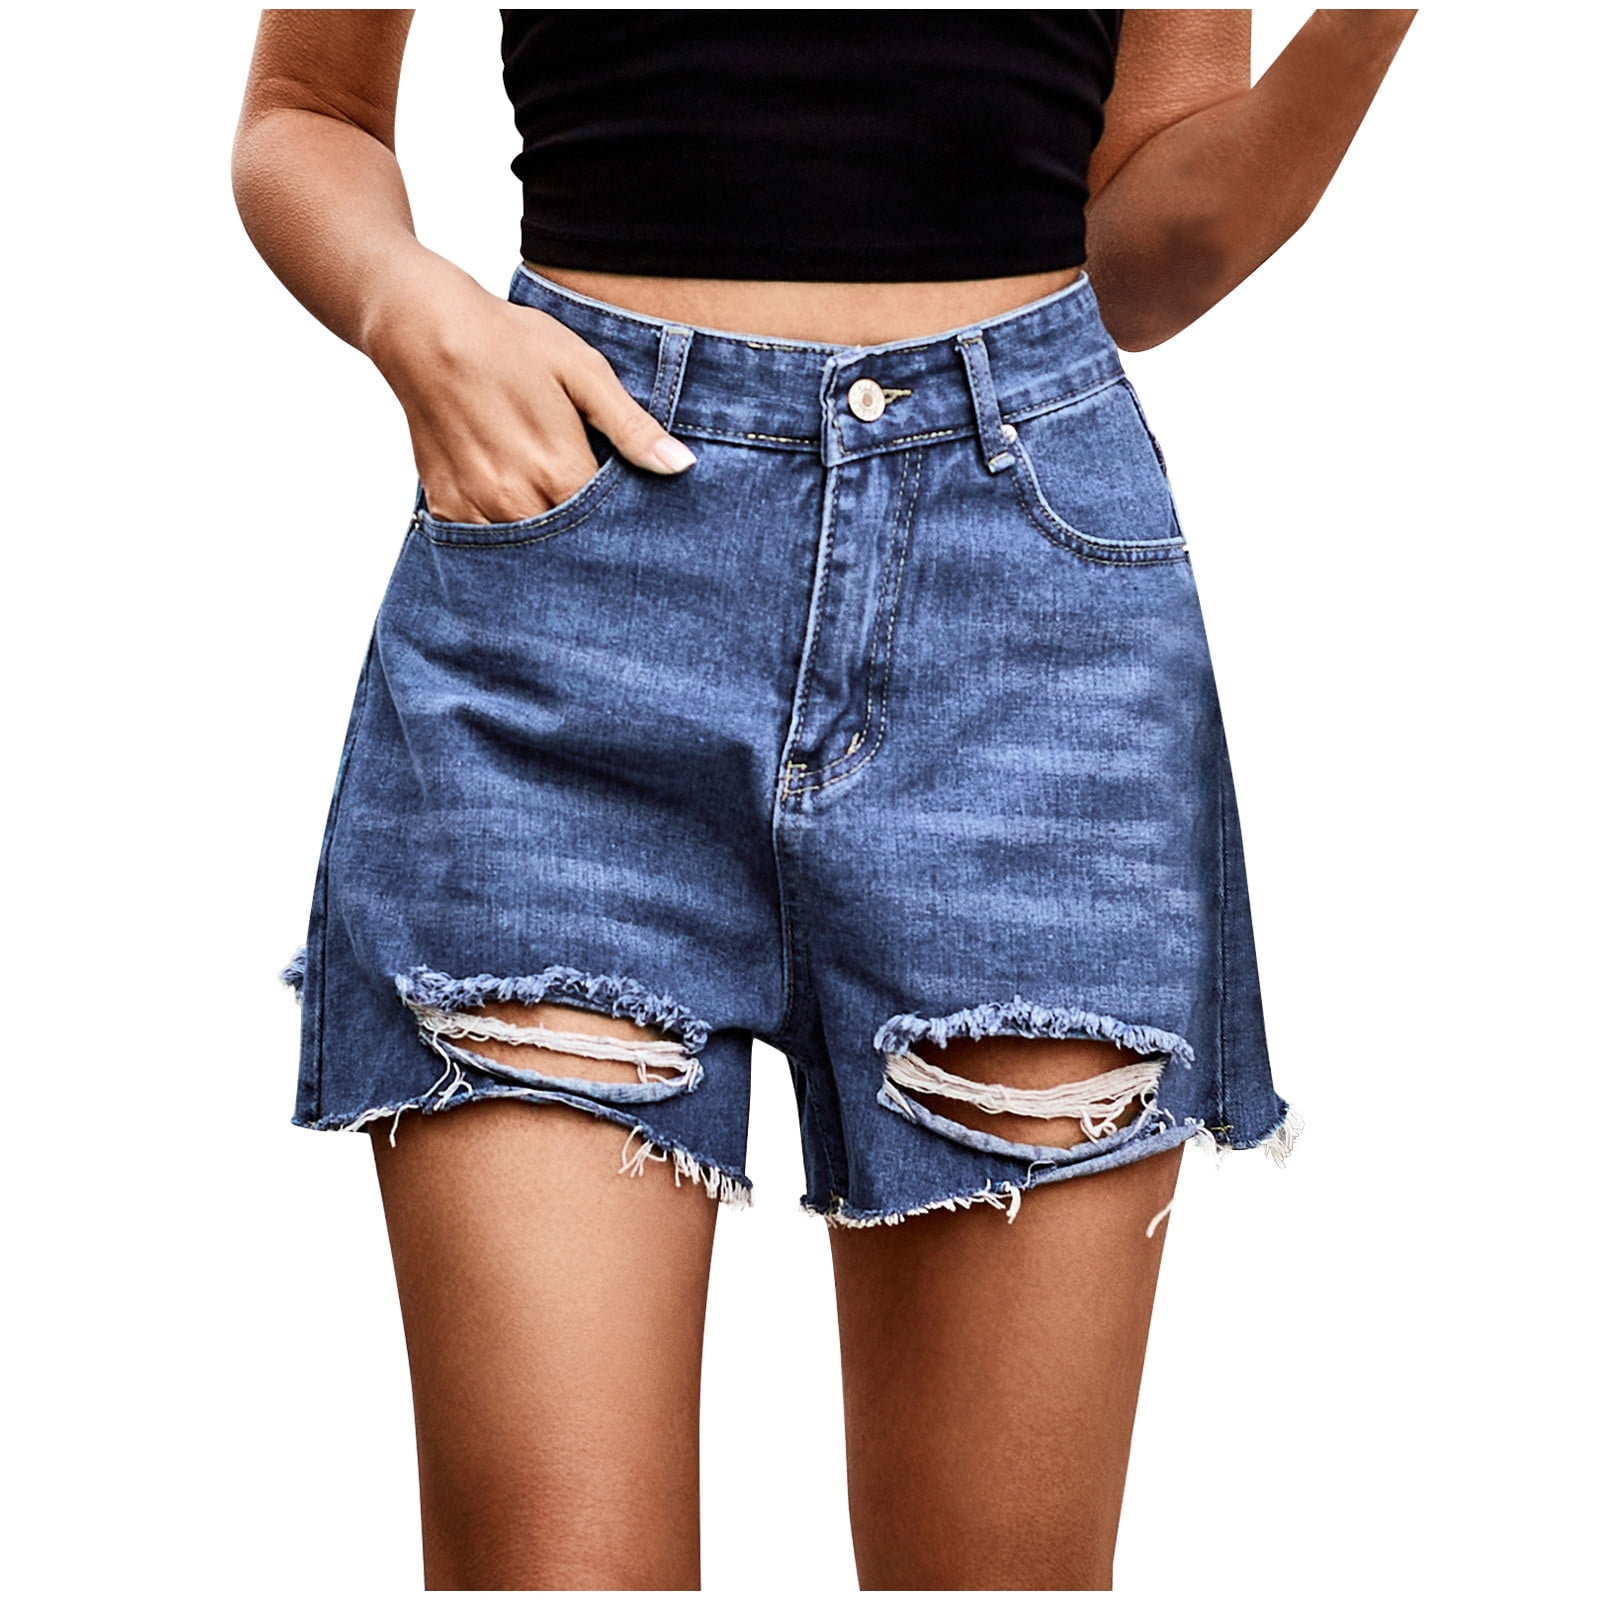 YYDGH Women's Denim Shorts Casual Mid Waist Ripped Jean Shorts Frayed Raw  Hem Distressed Stretchy Short Jeans Light Blue M